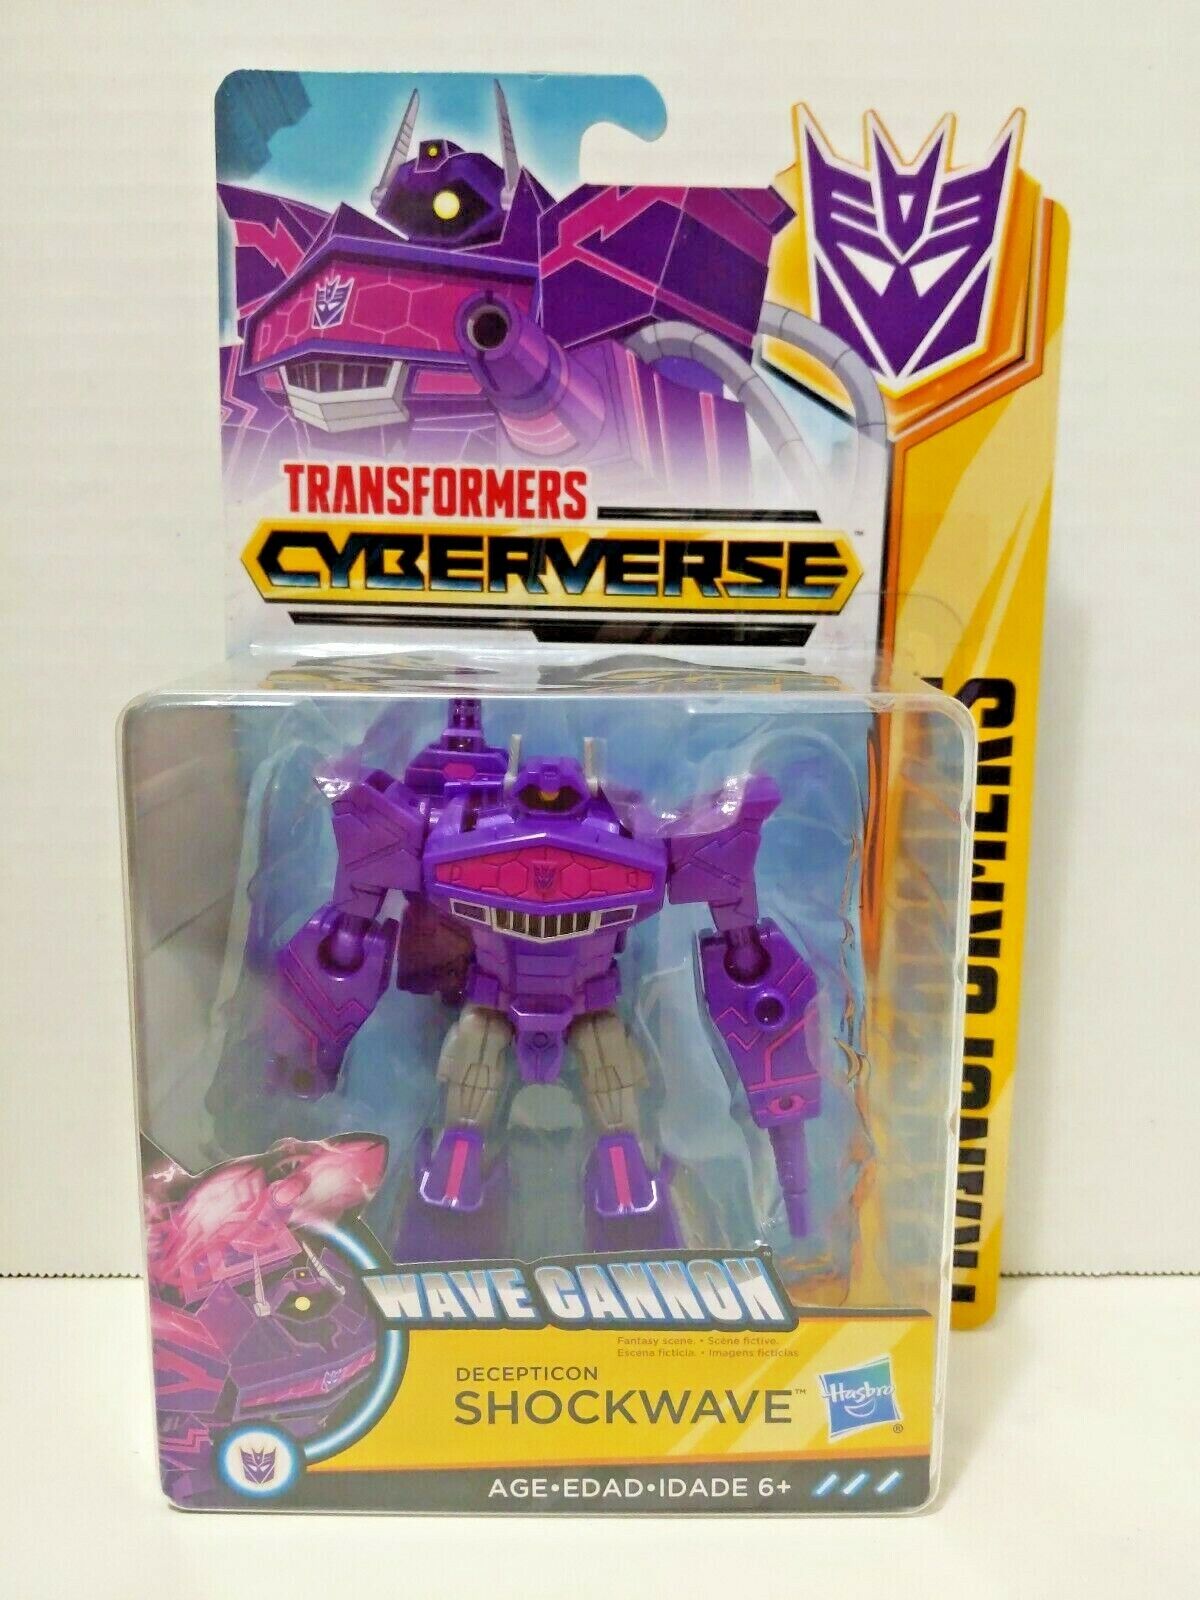 Transformers Cyberverse Adventures Action Attackers Warrior Class Shockwave